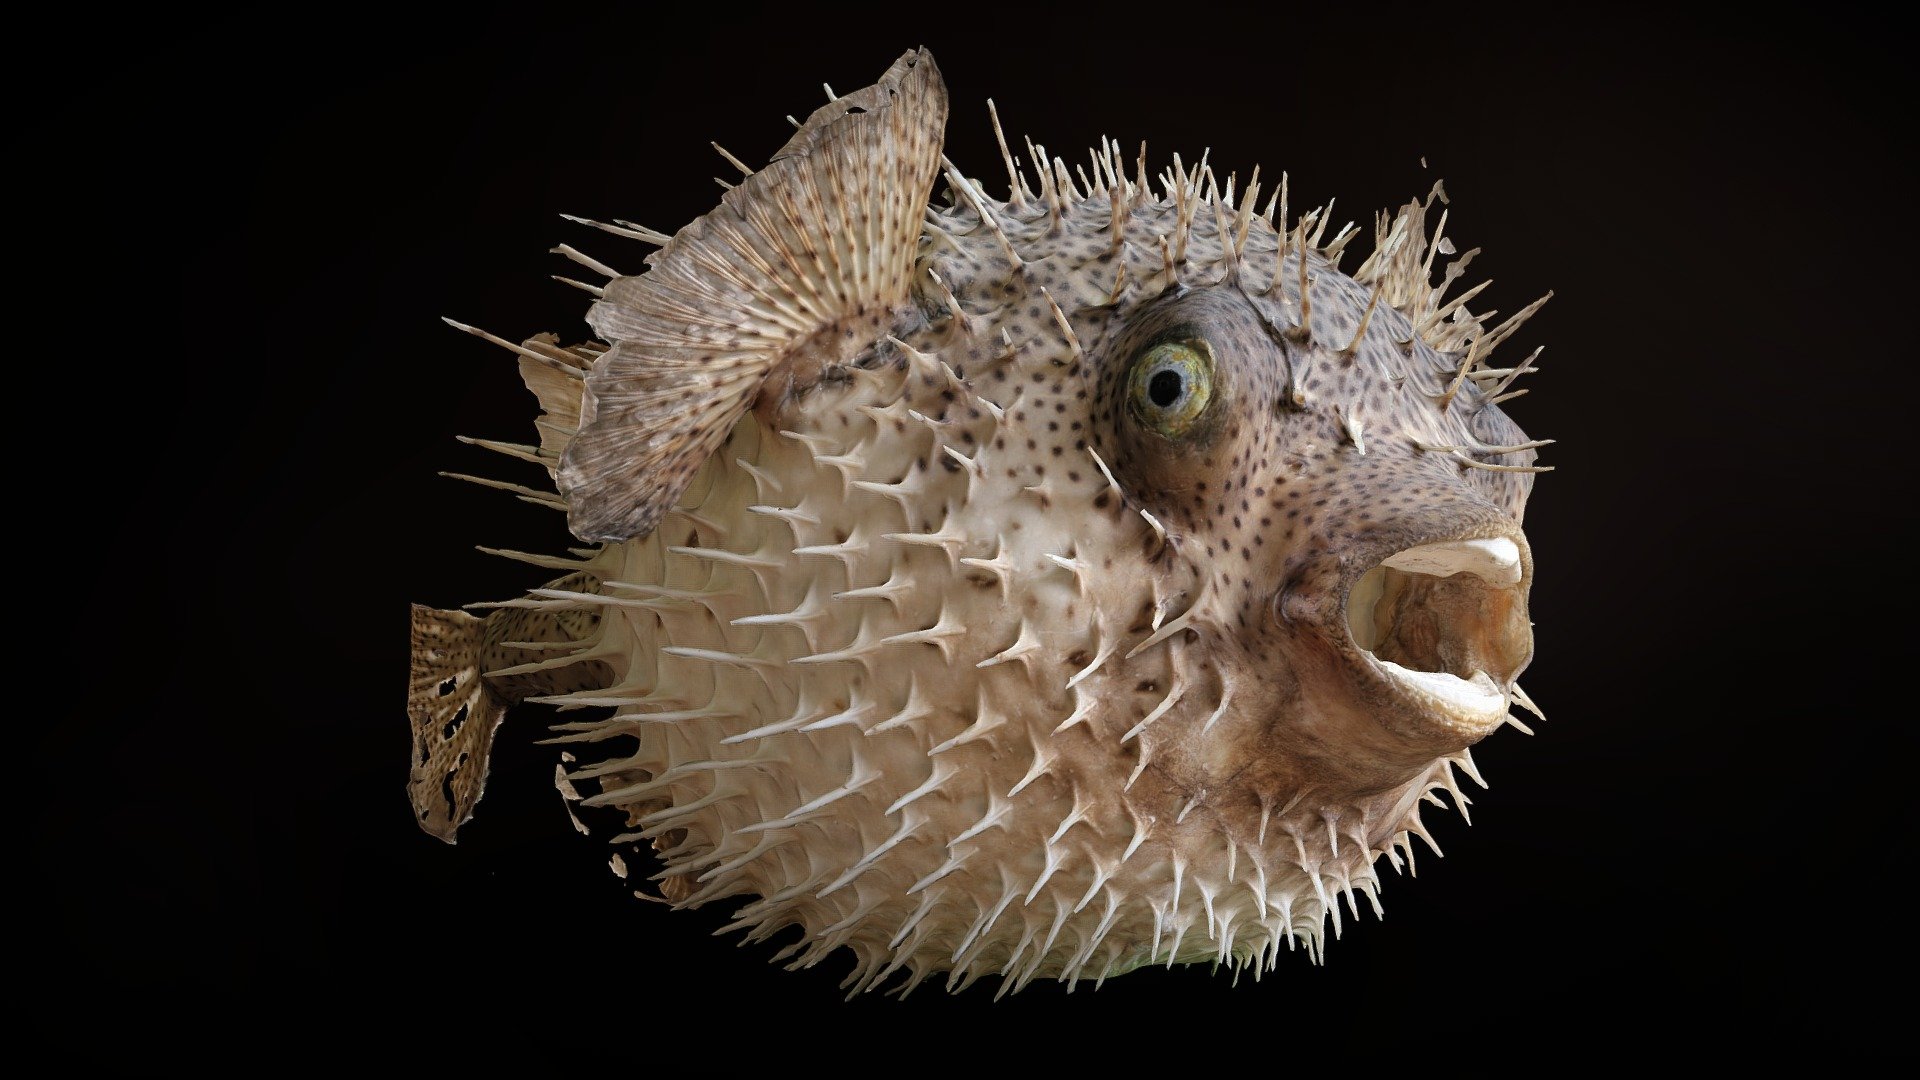 **3D scan data (point cloud) provided as is. Use the inspector / model info to find out more before you buy.
**

Scanned at the Bournemouth Natural Science Society.

&ldquo;Porcupinefish are fish belonging to the family Diodontidae (order Tetraodontiformes), also commonly called blowfish and, sometimes, balloonfish and globefish. [&hellip;] Porcupinefish are medium- to large-sized fish, and are found in shallow temperate and tropical seas worldwide. [&hellip;]
Porcupinefish have the ability to inflate their bodies by swallowing water or air, thereby becoming rounder. This increase in size (almost double vertically) reduces the range of potential predators to those with much bigger mouths. A second defense mechanism is provided by the sharp spines, which radiate outwards when the fish is inflated.